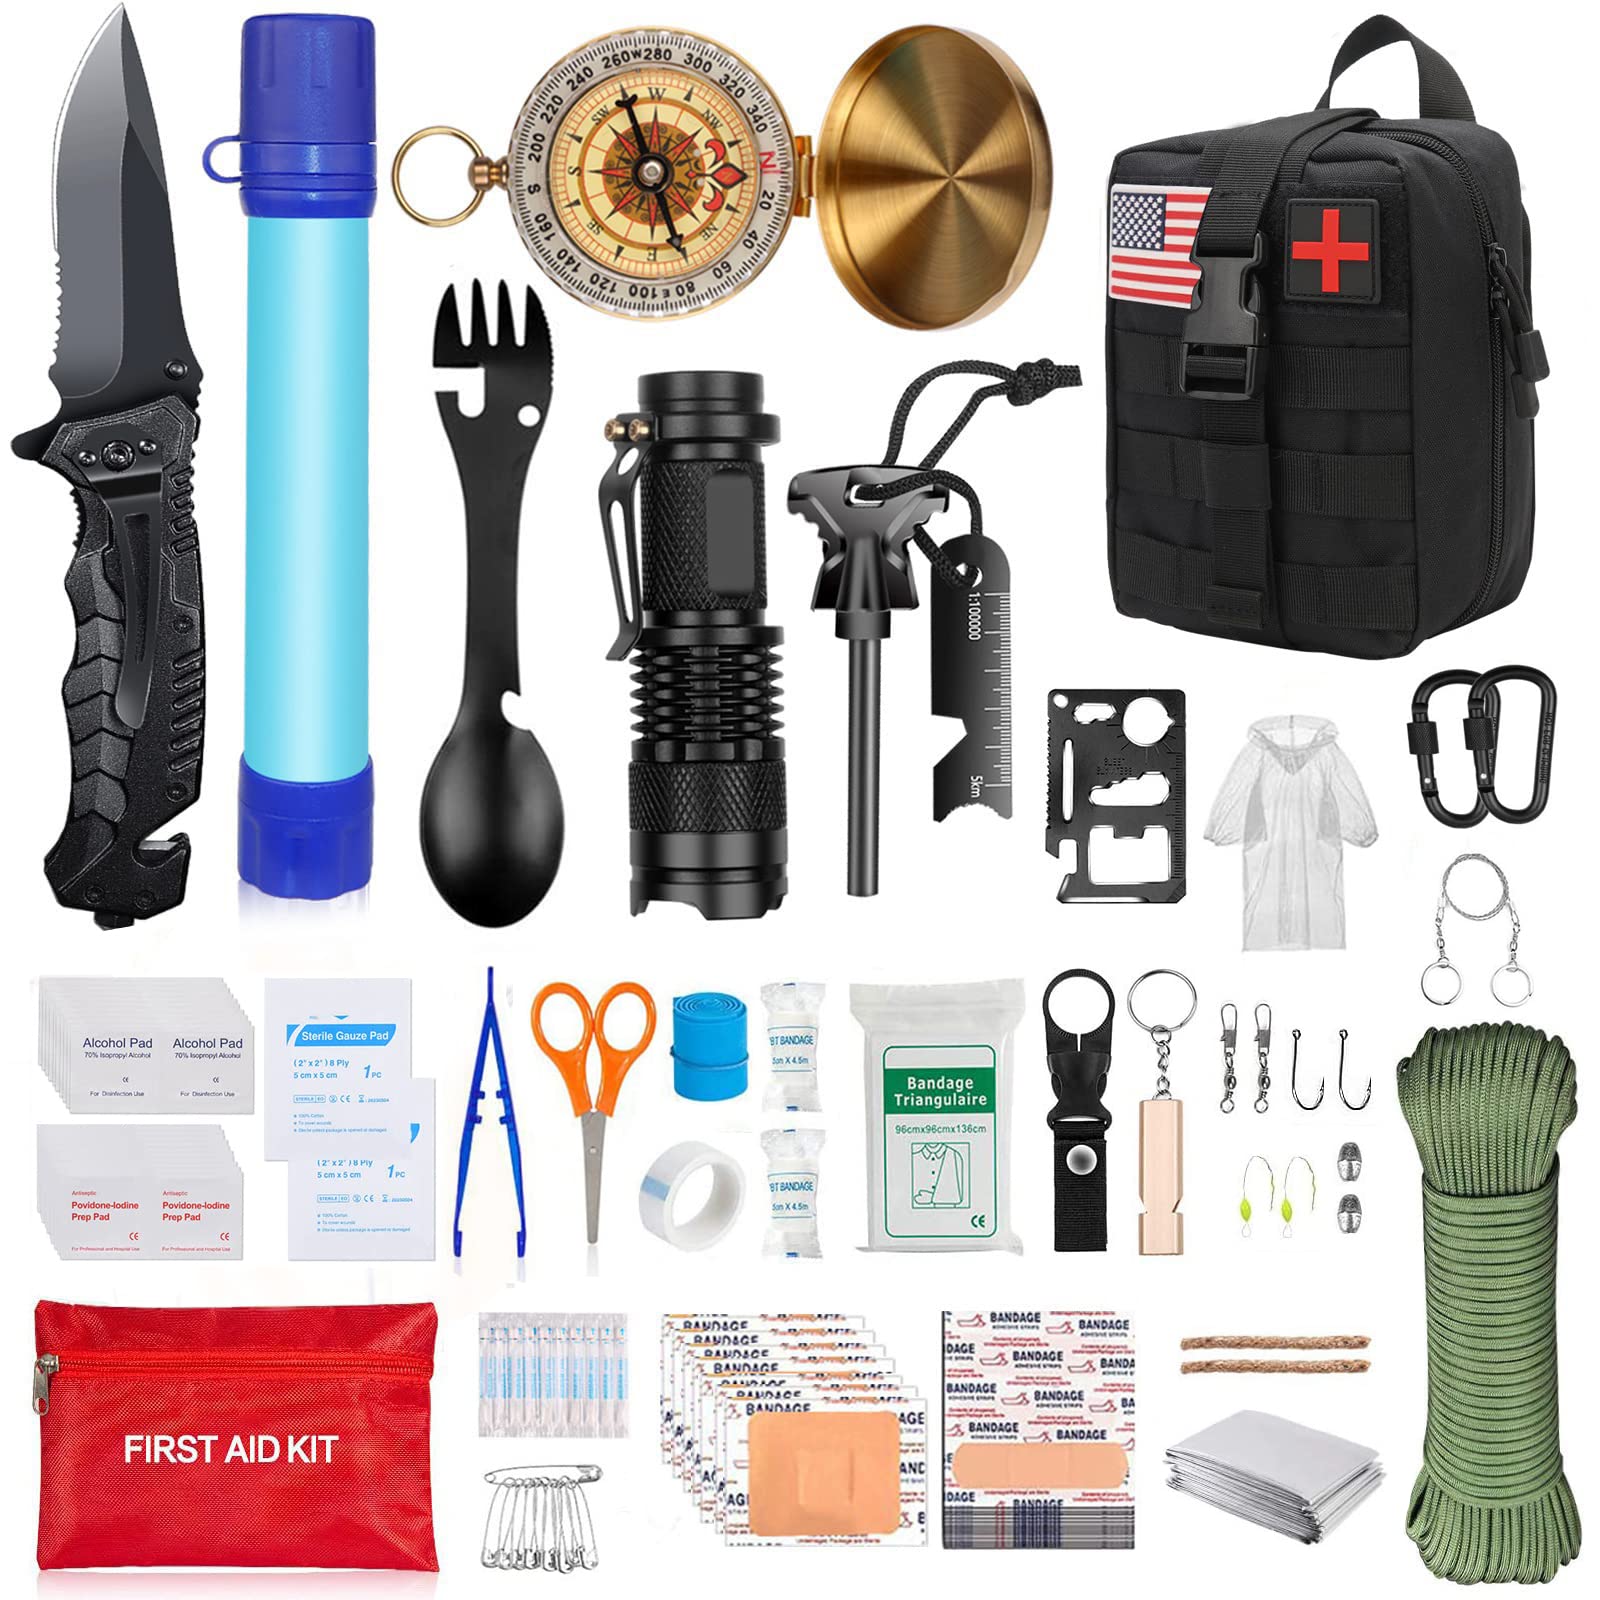 Survival Kit and First Aid Kit,Unique Gifts for Men Teenage boy